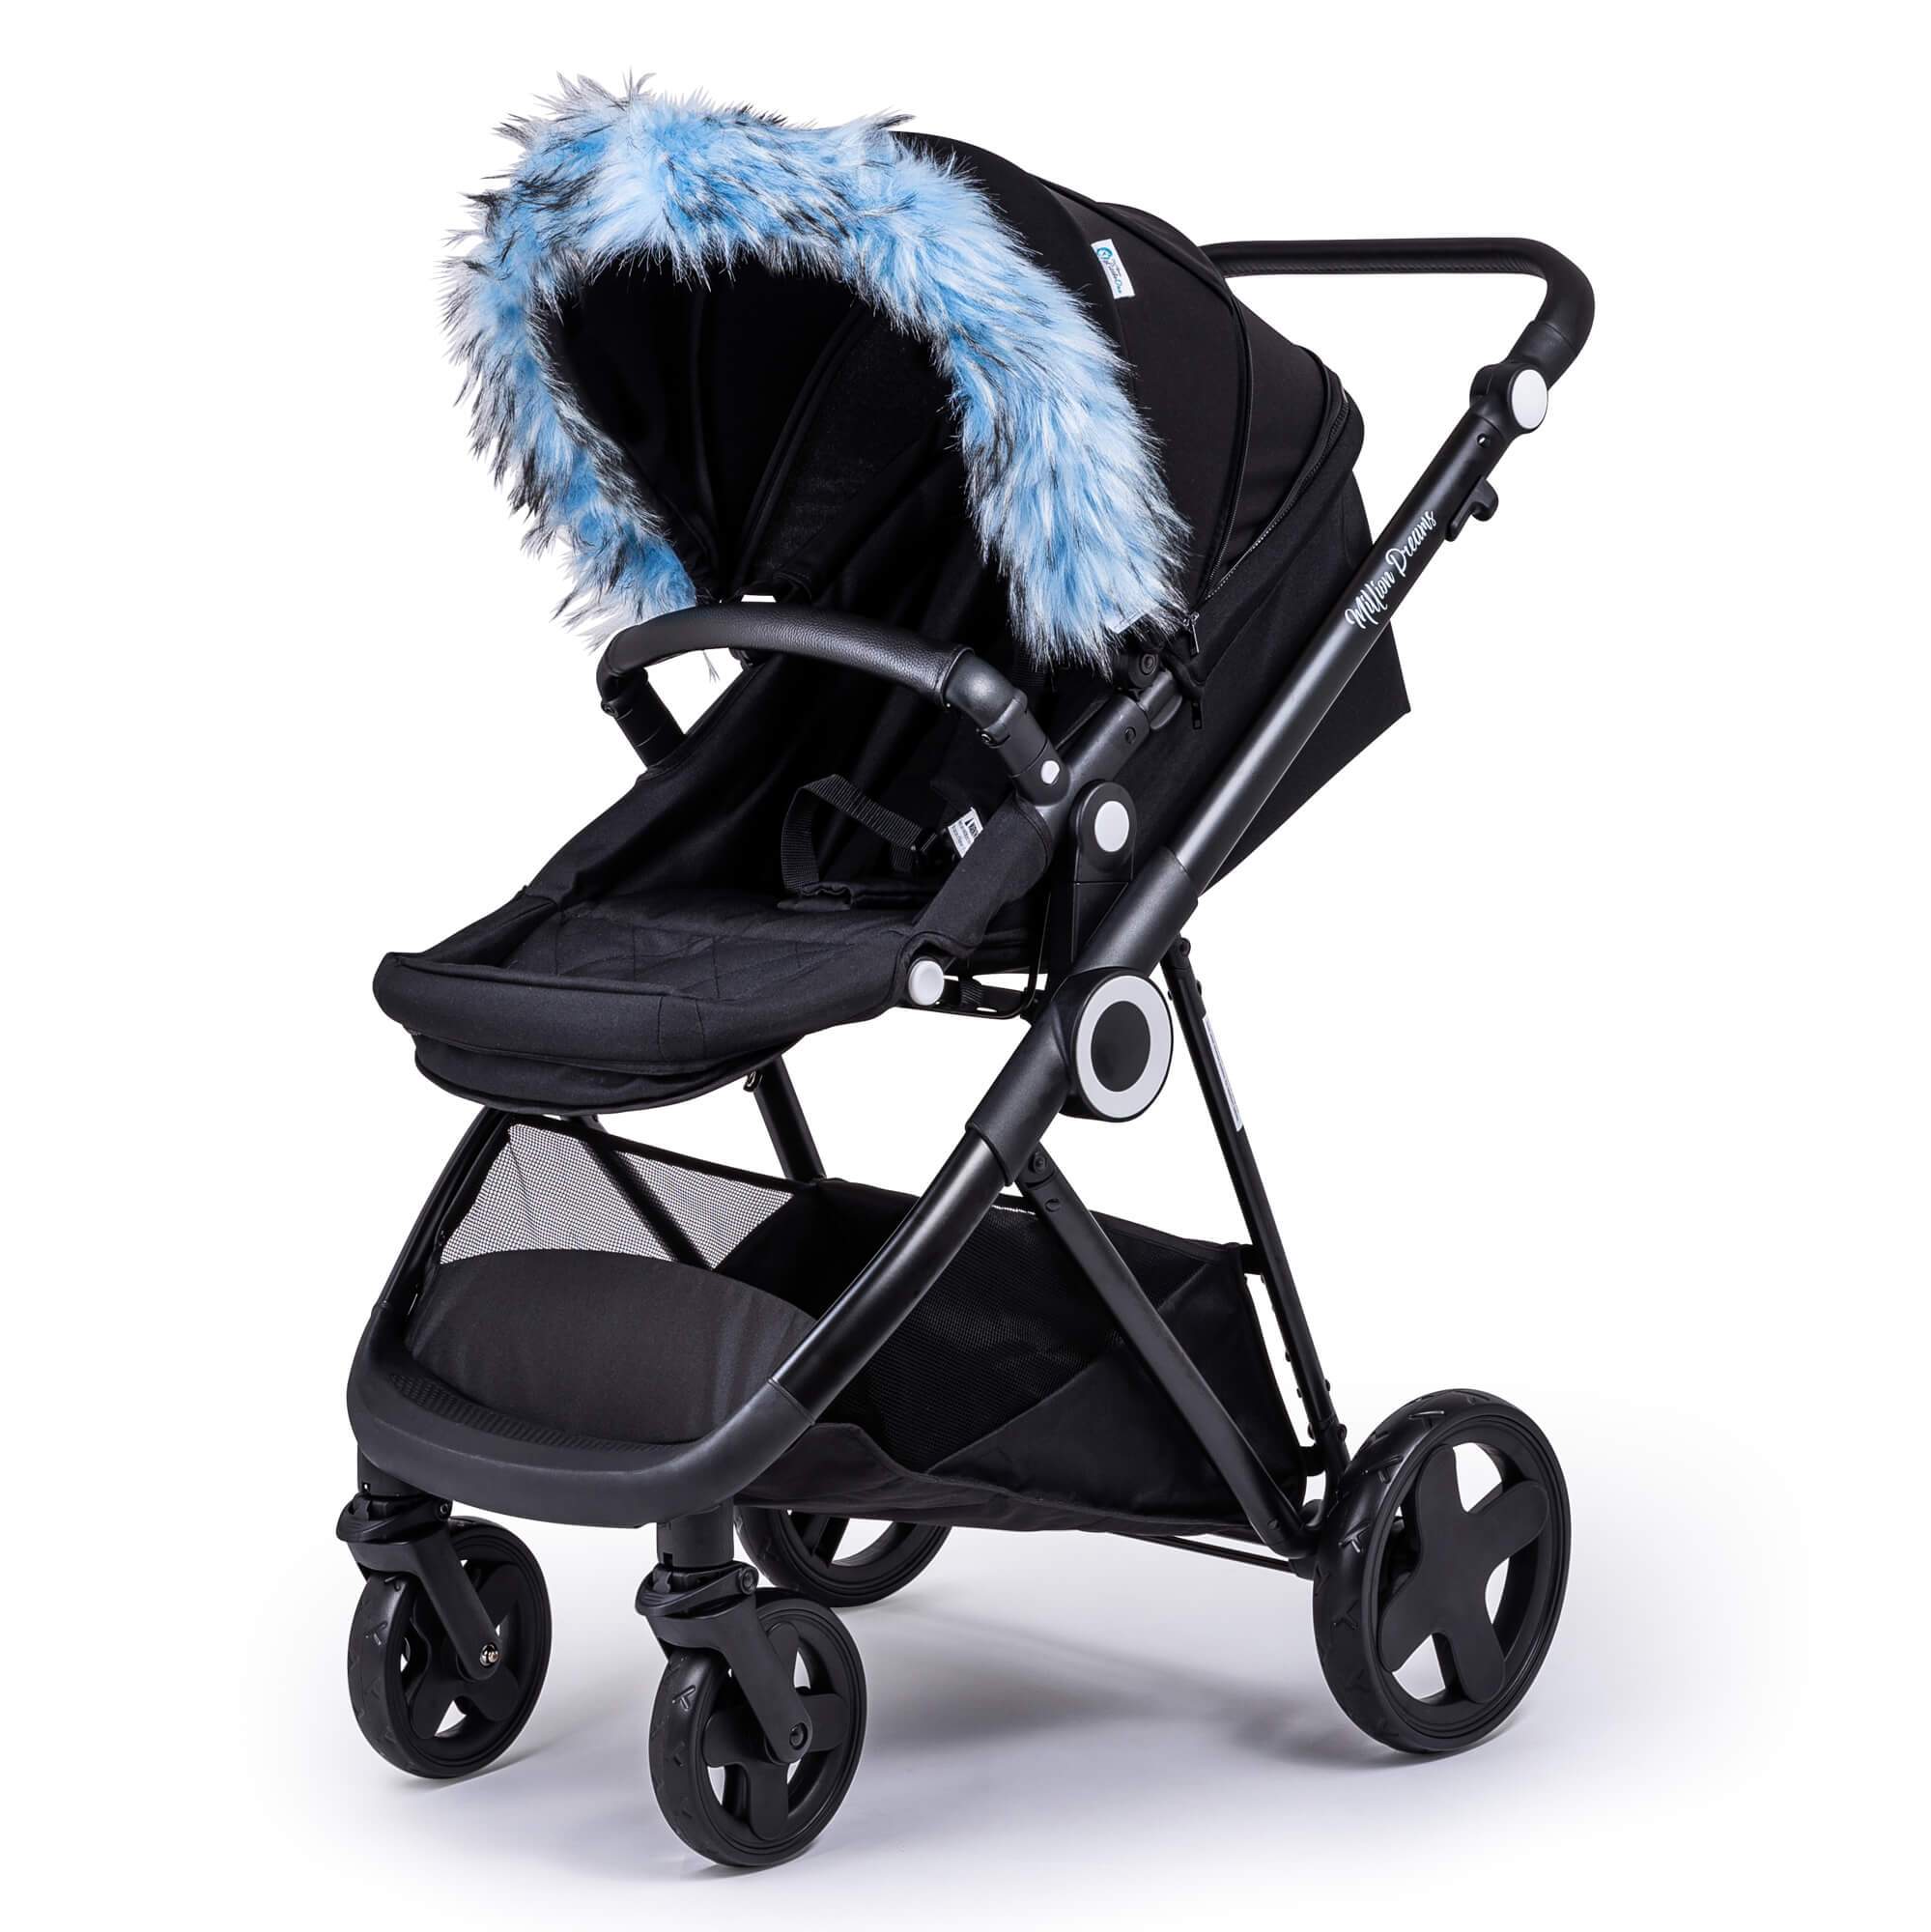 Pram Fur Hood Trim Attachment for Pushchair Compatible with Mountain Buggy - Light Blue / Fits All Models | For Your Little One